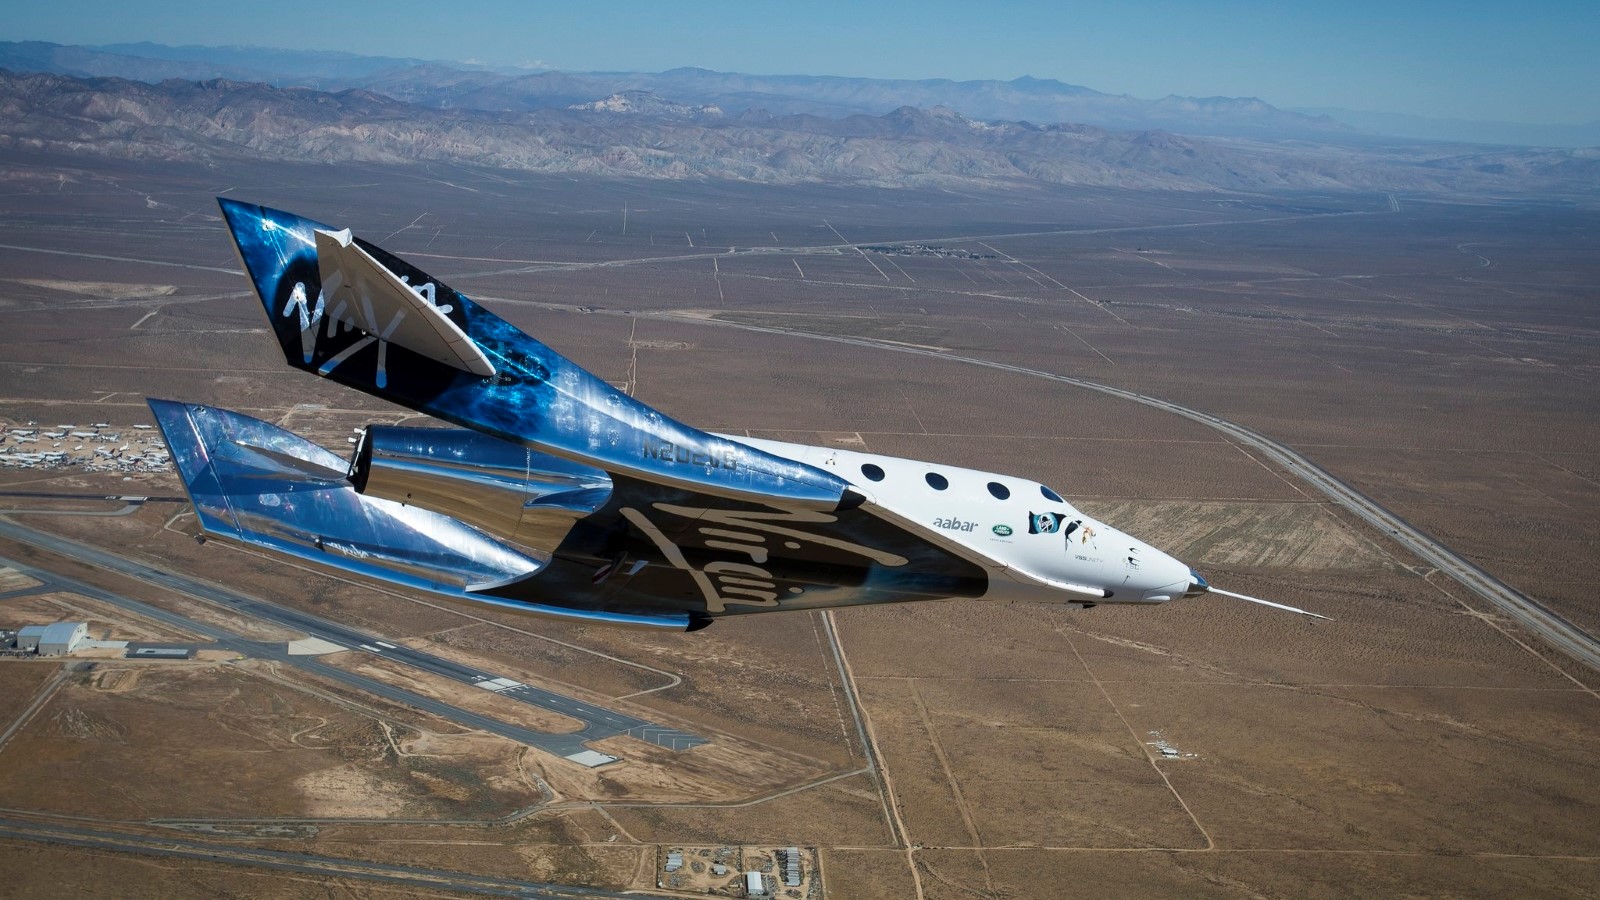 Virgin Galatic to compete against Blue Origin and SpaceX for space tourism